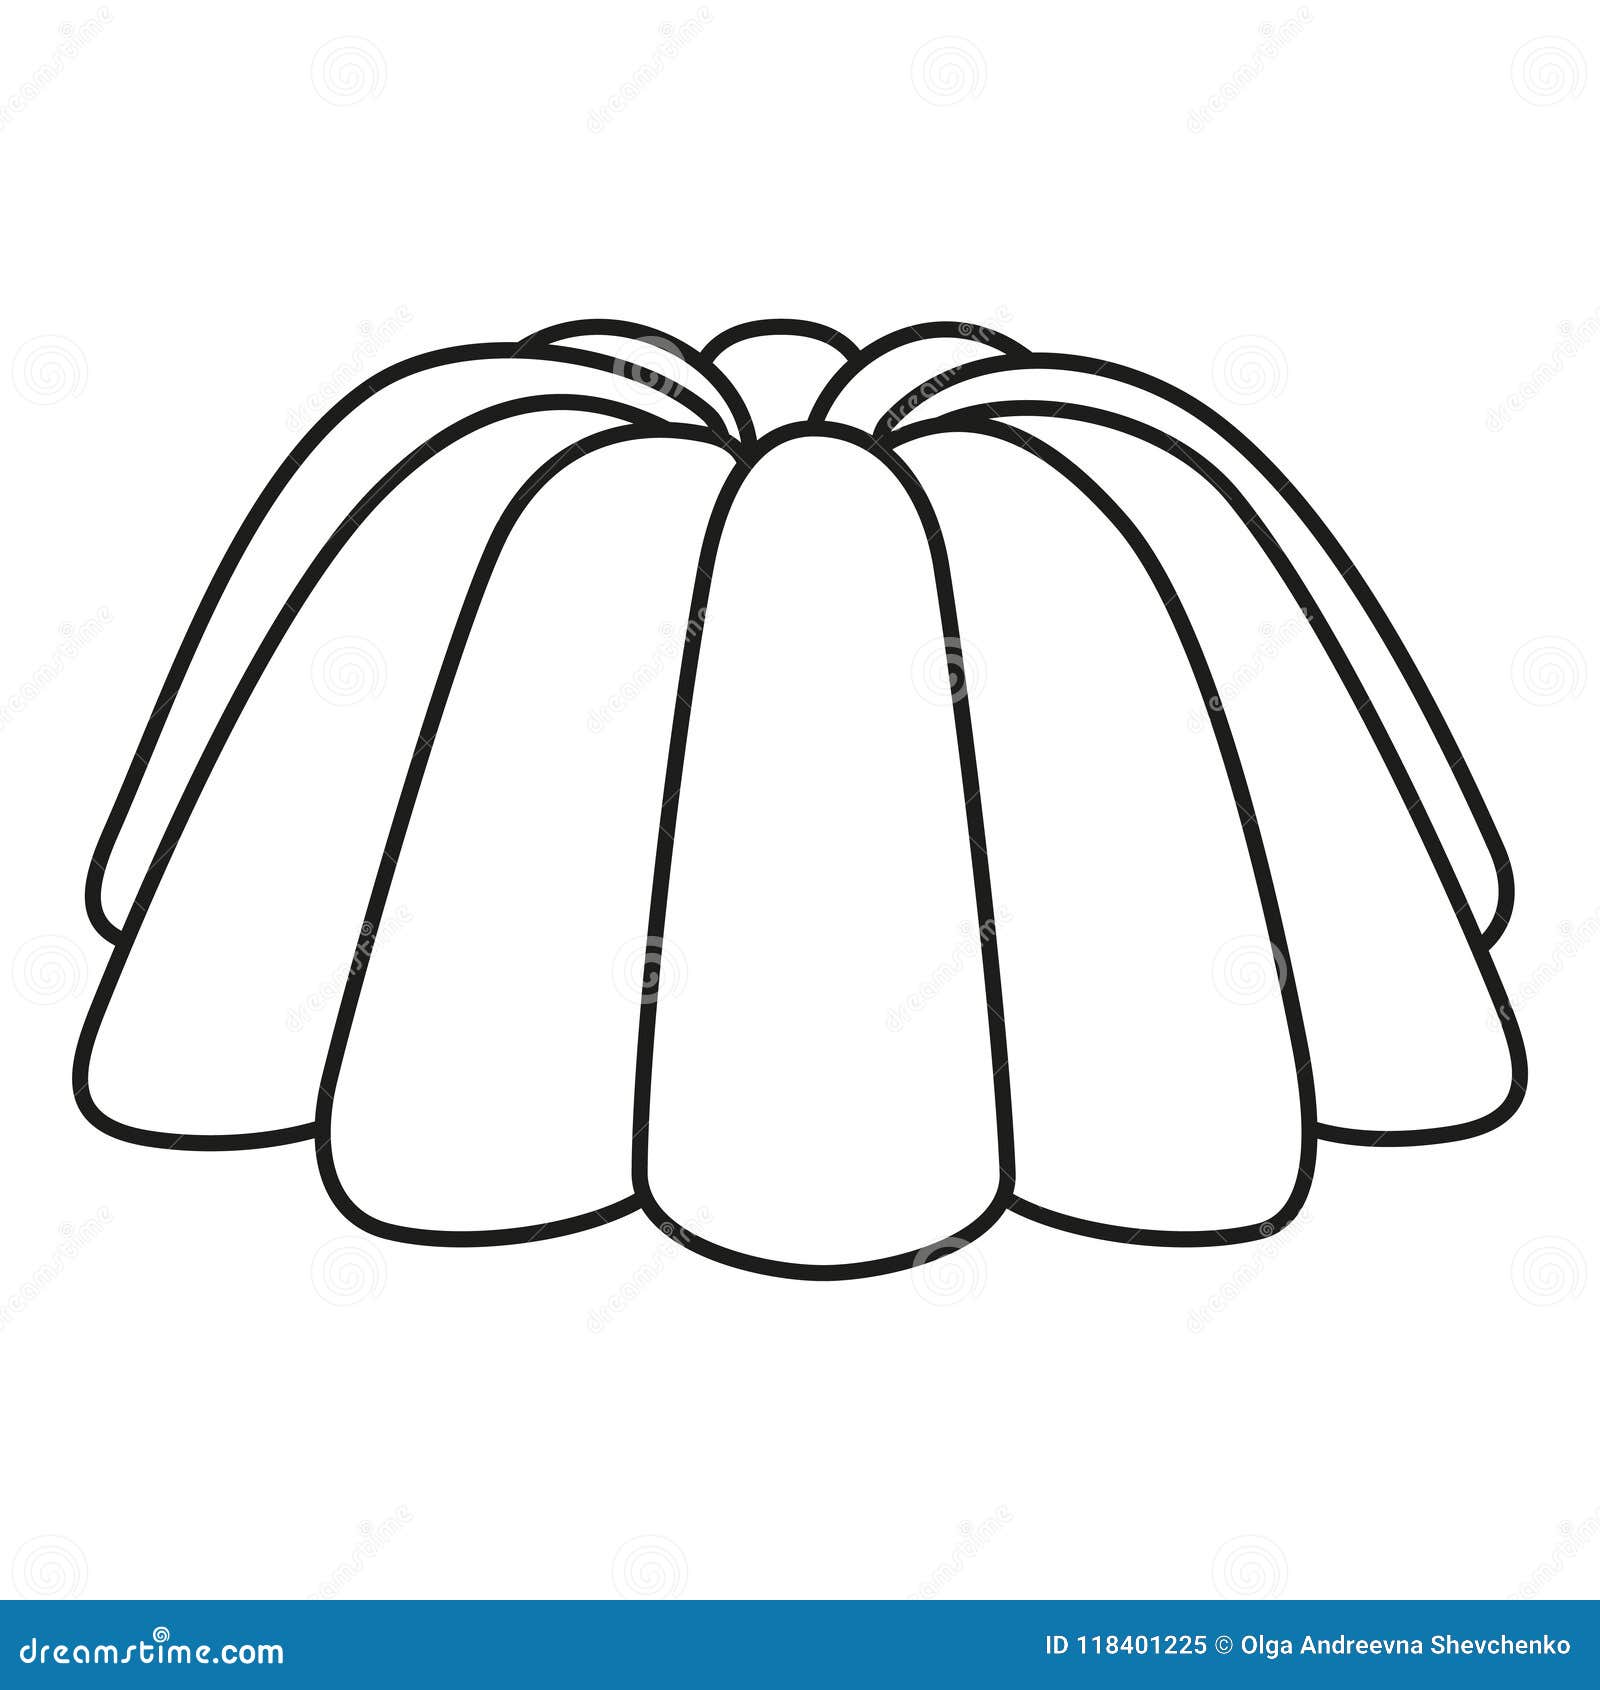 Jelly Coloring Stock Illustrations 454 Jelly Coloring Stock Illustrations Vectors Clipart Dreamstime